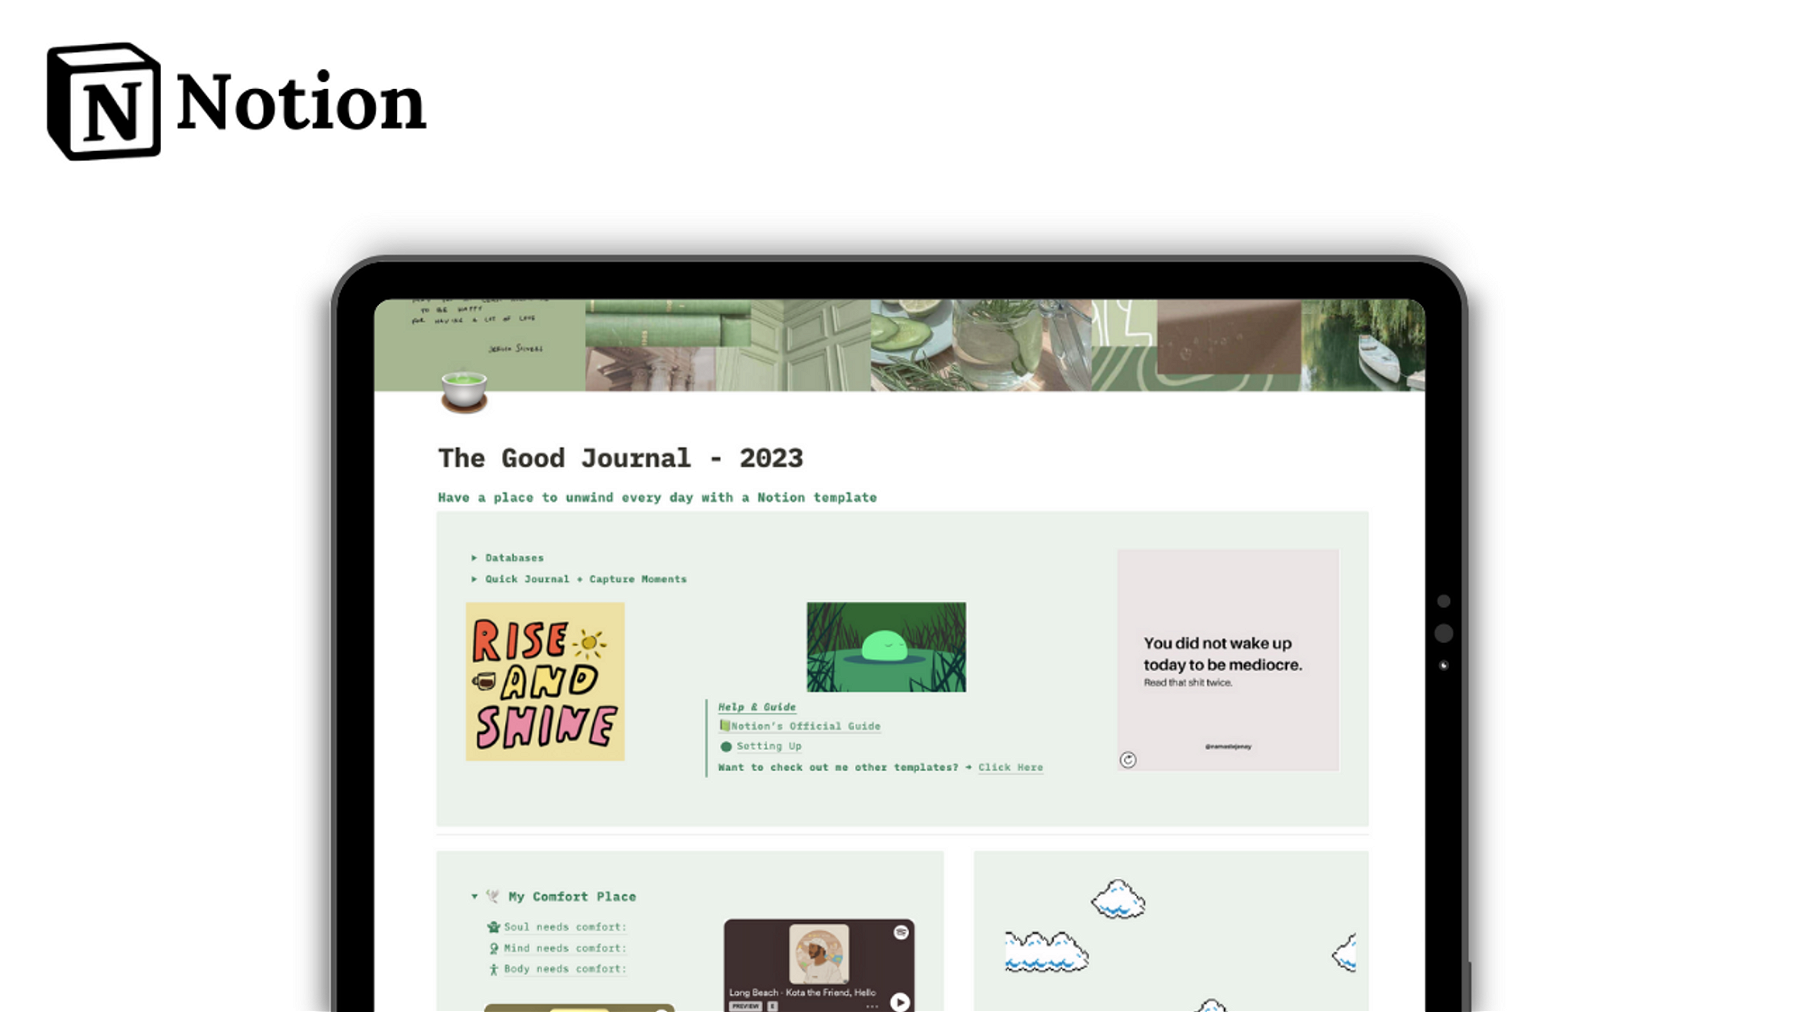 The Good Journal - 2023